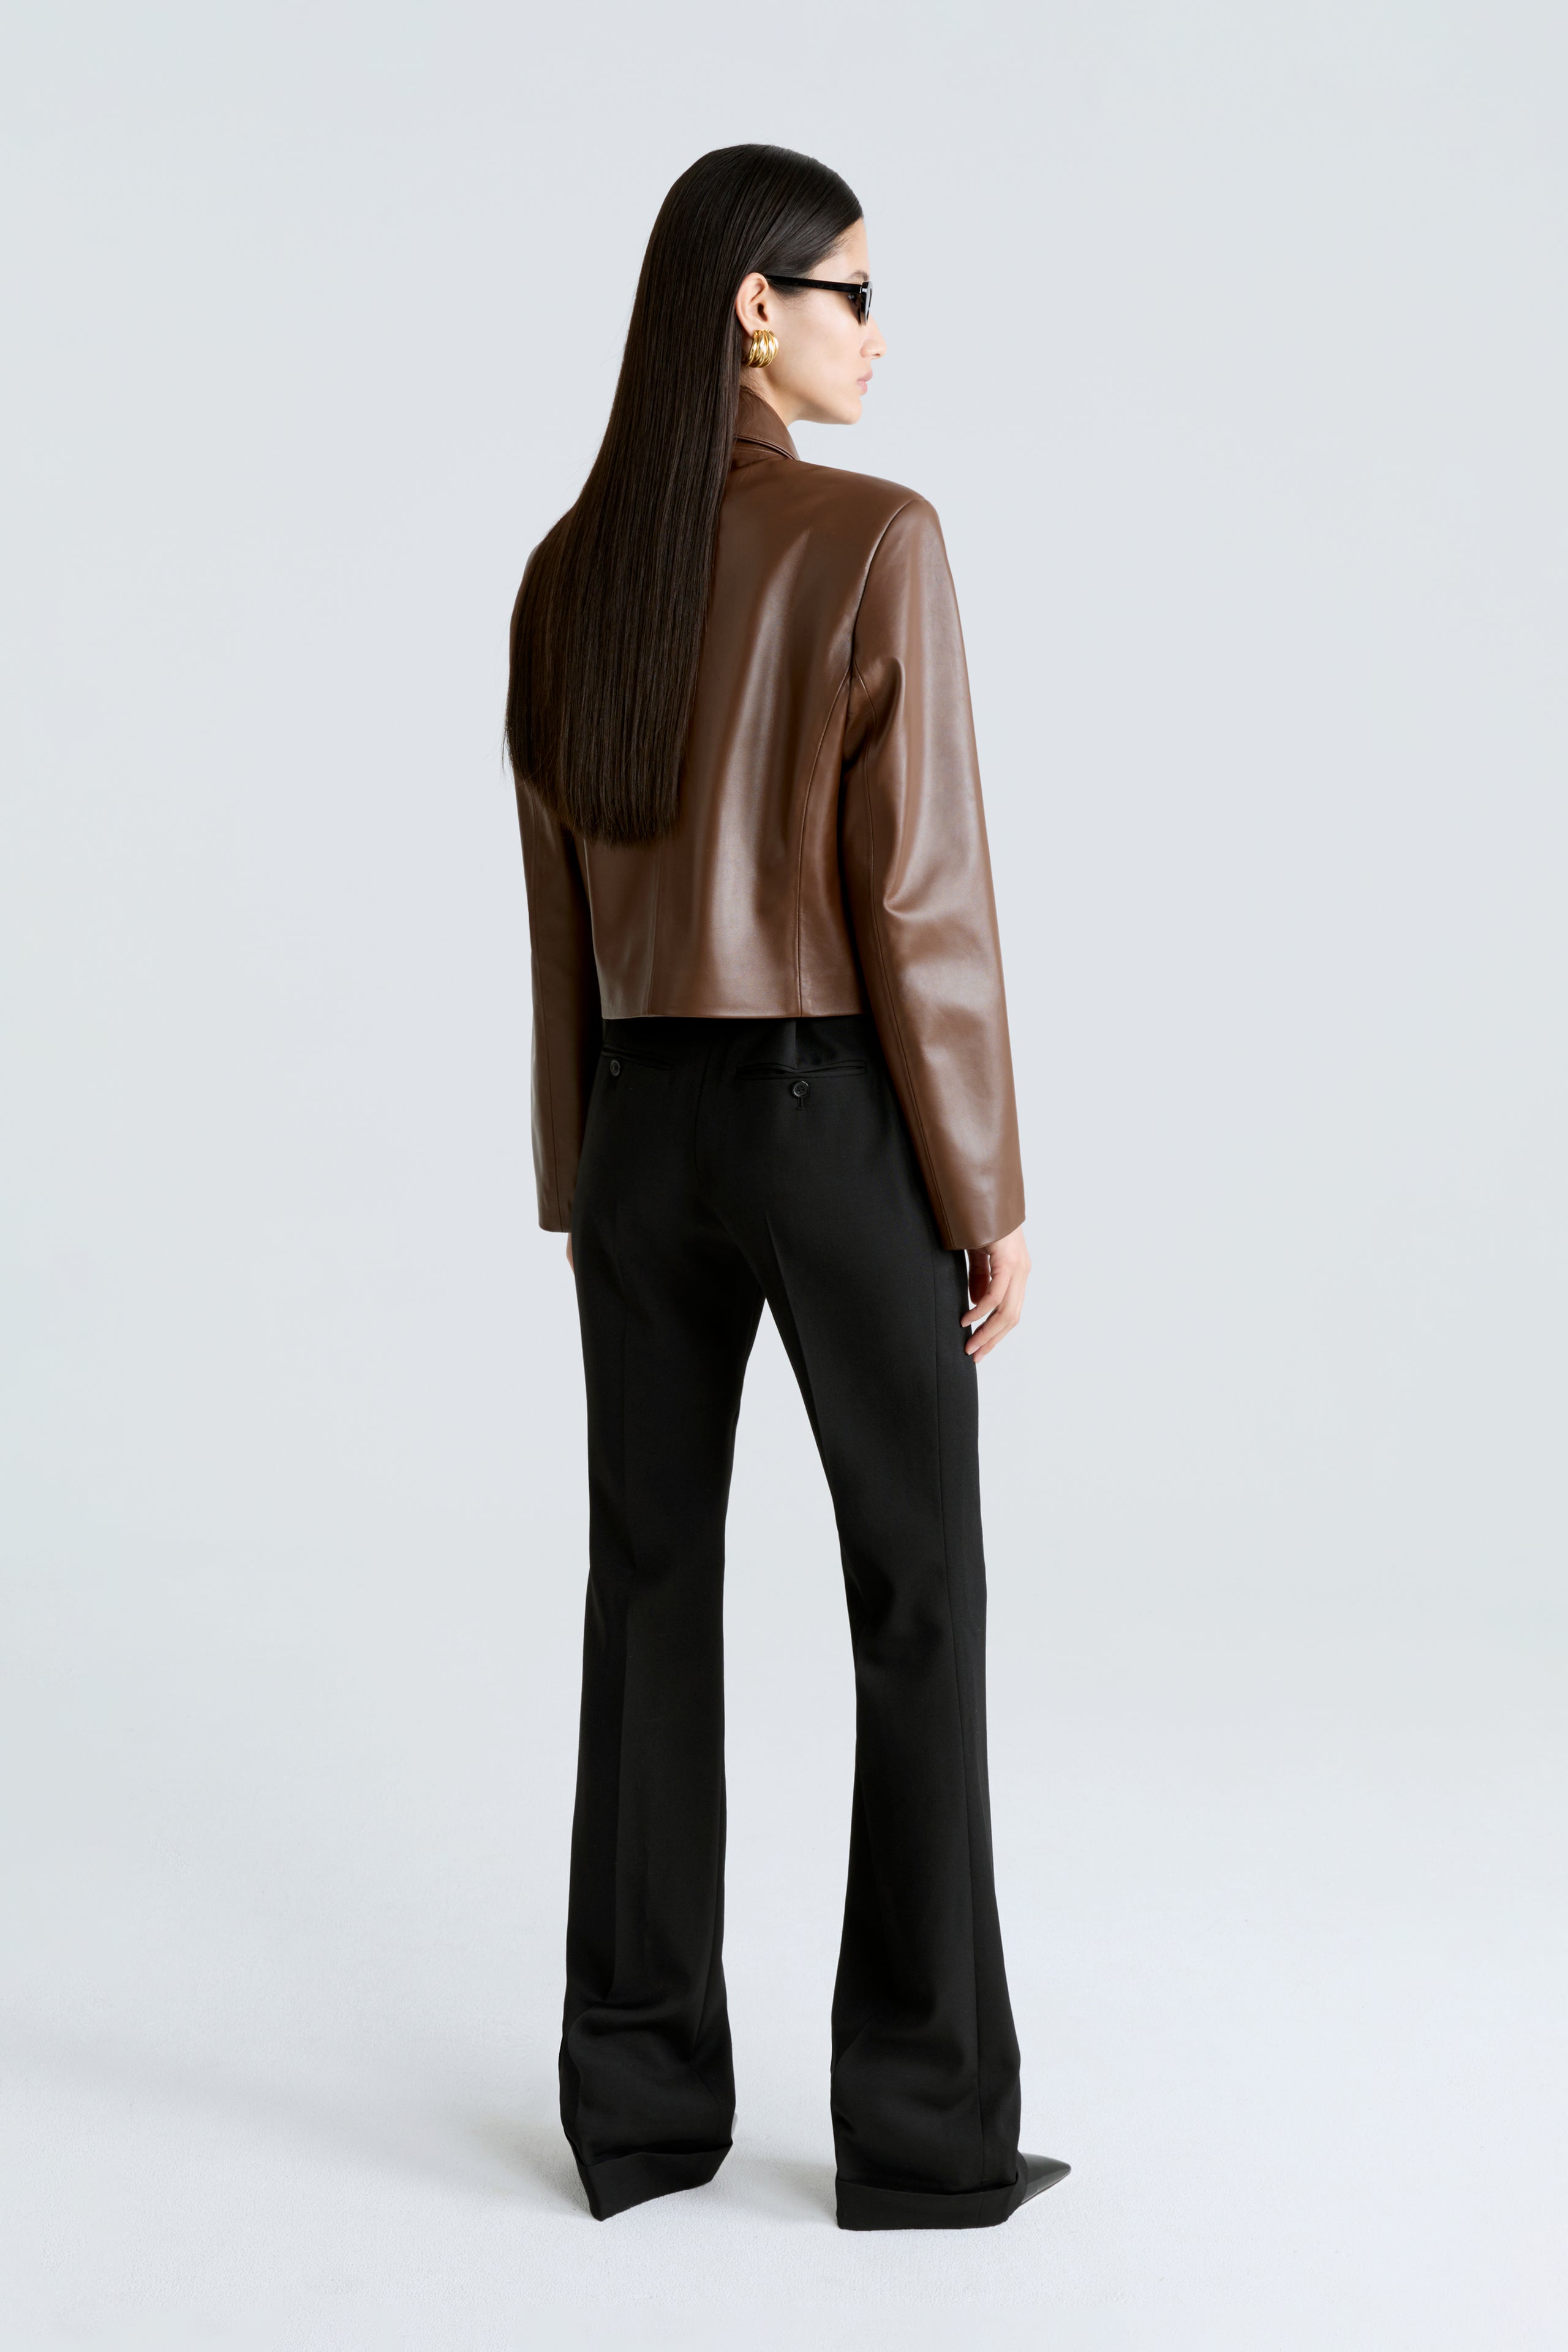 Model is wearing the Bleeker Milk Chocolate Cropped Leather Jacket Back